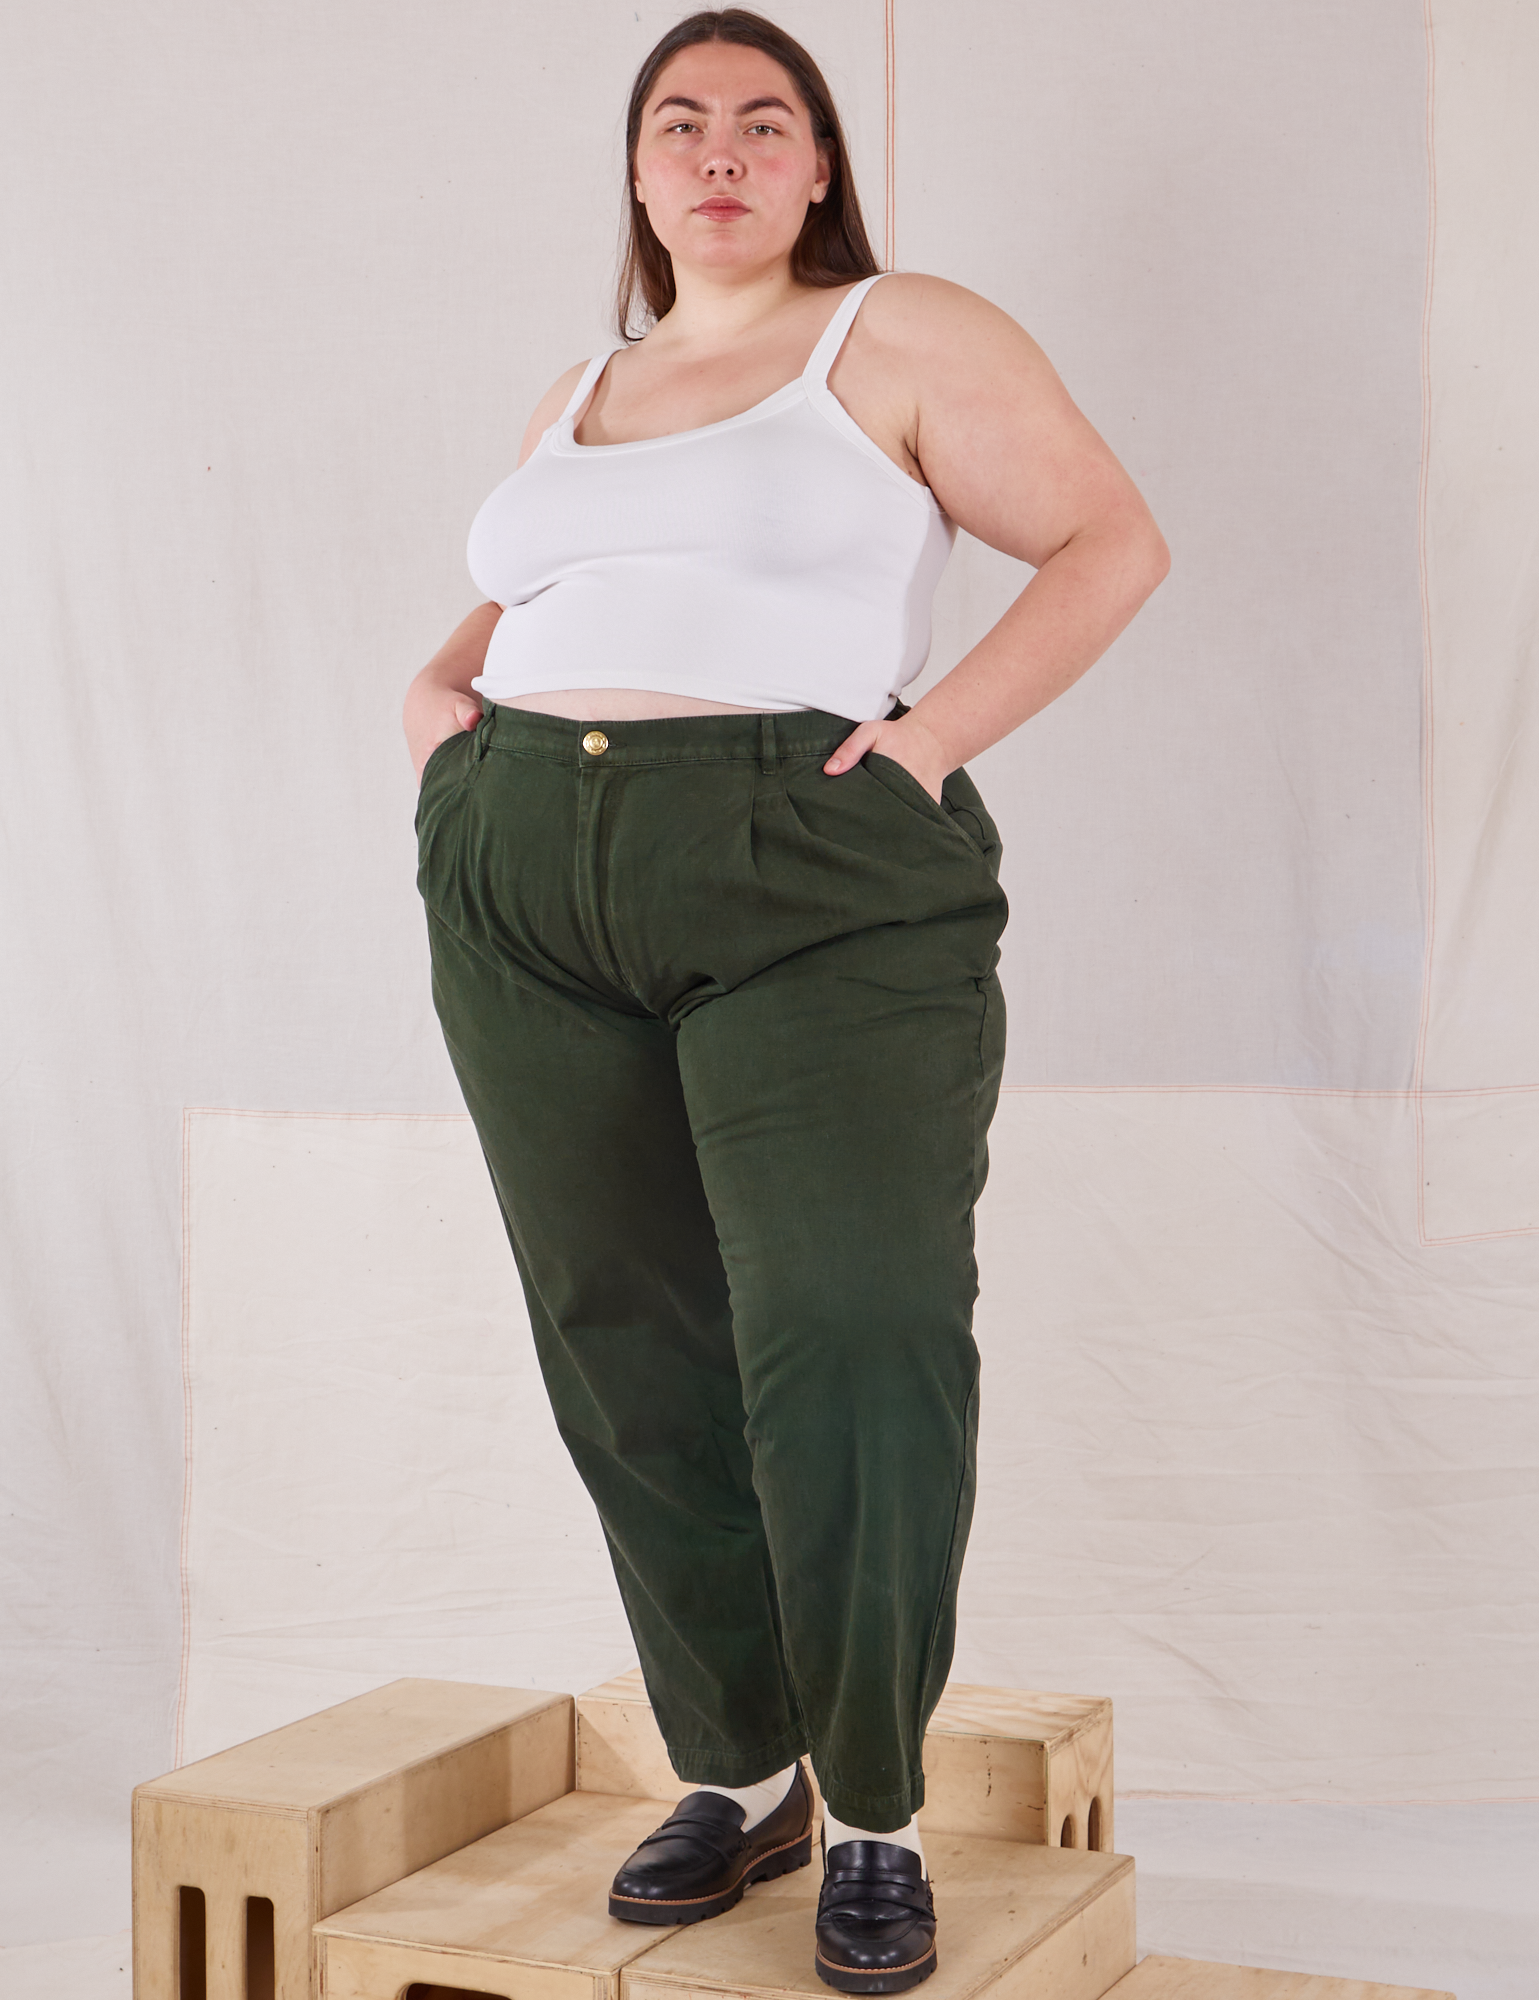 Marielena is 5'8" and wearing 2XL Heavyweight Trousers in Swamp Green paired with Cropped Cami in vintage tee off-white